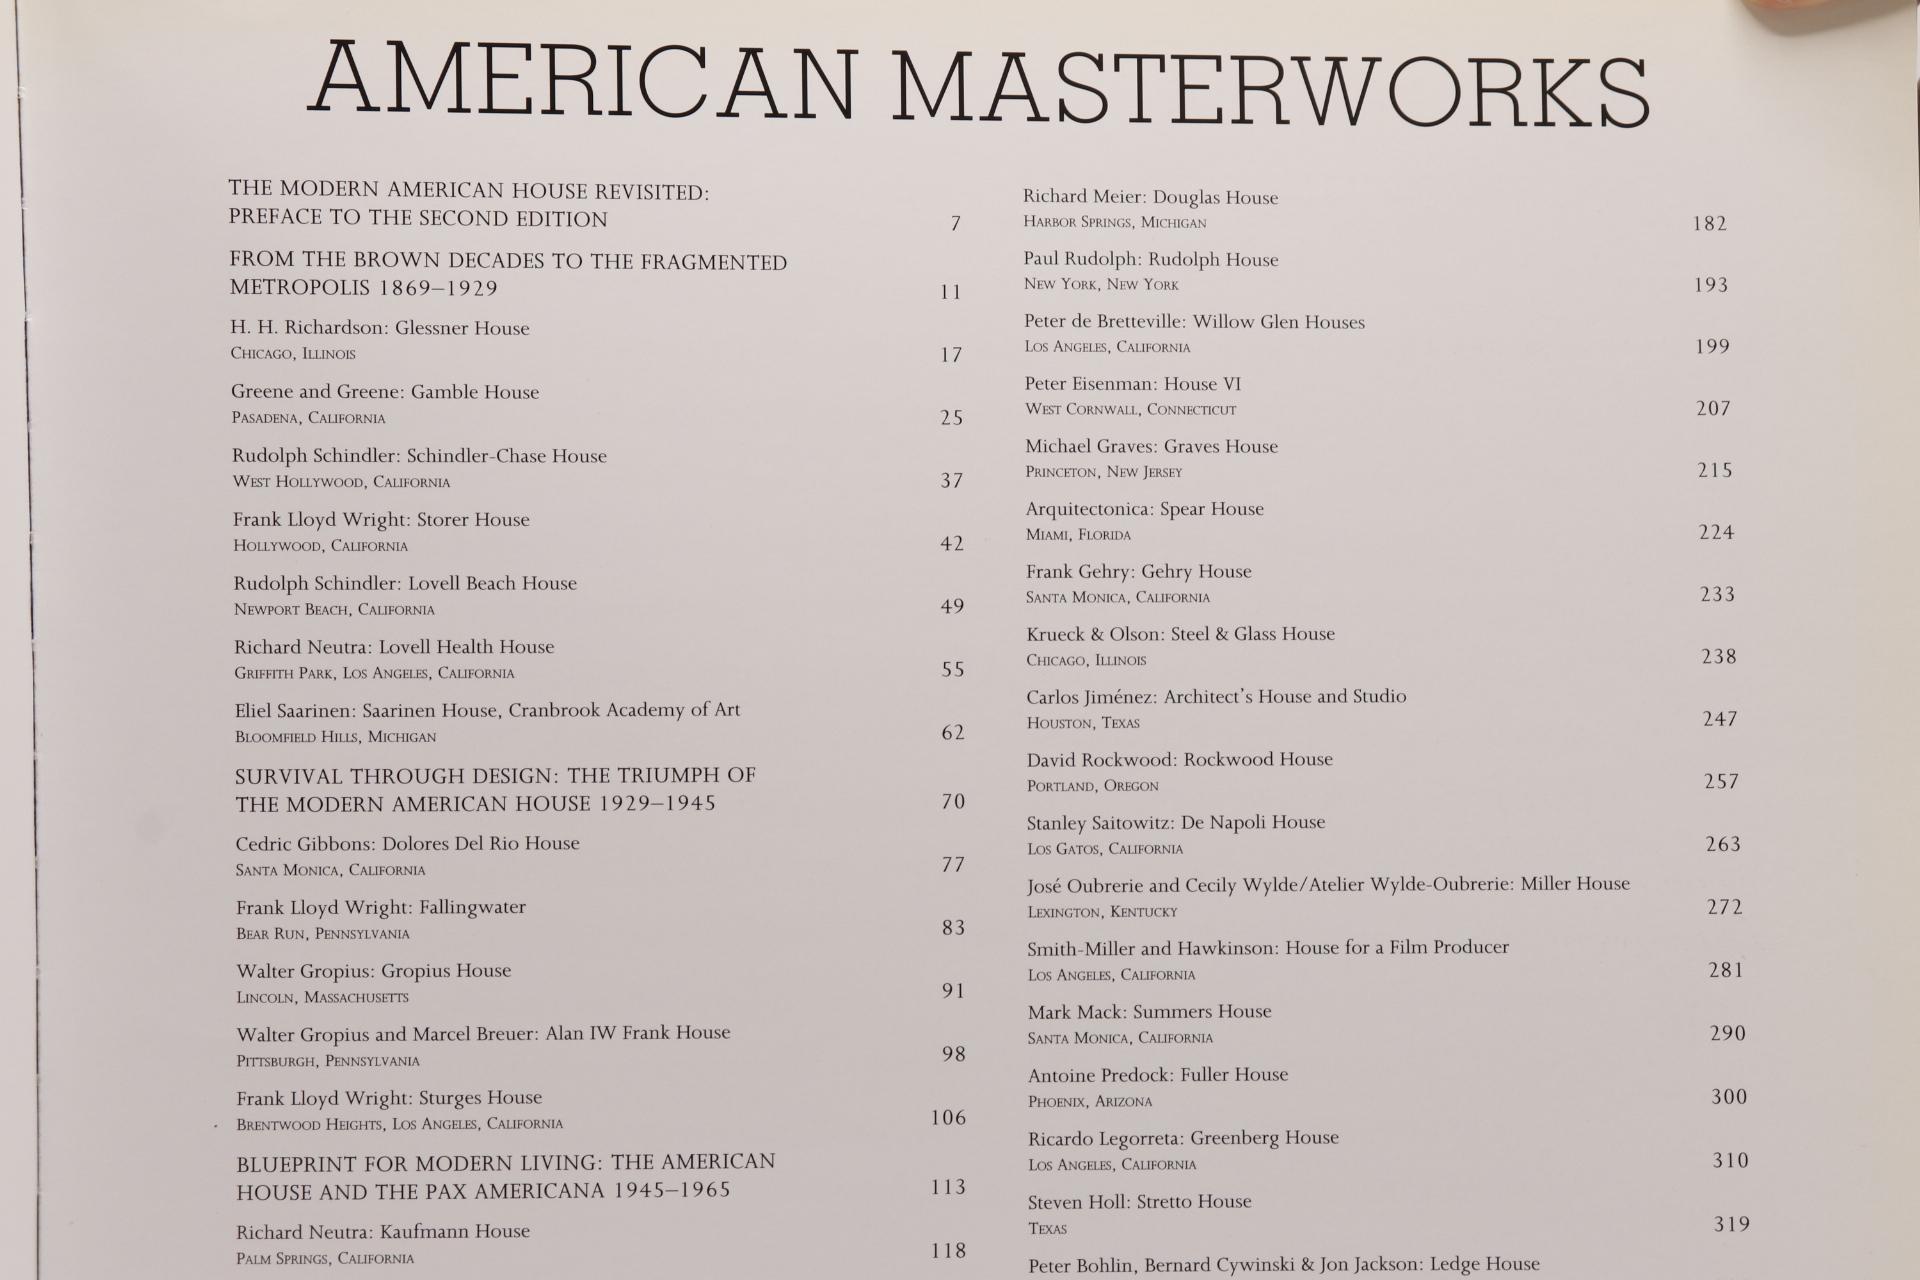 Paper American Masterworks, Houses of the 20th and 21st Century